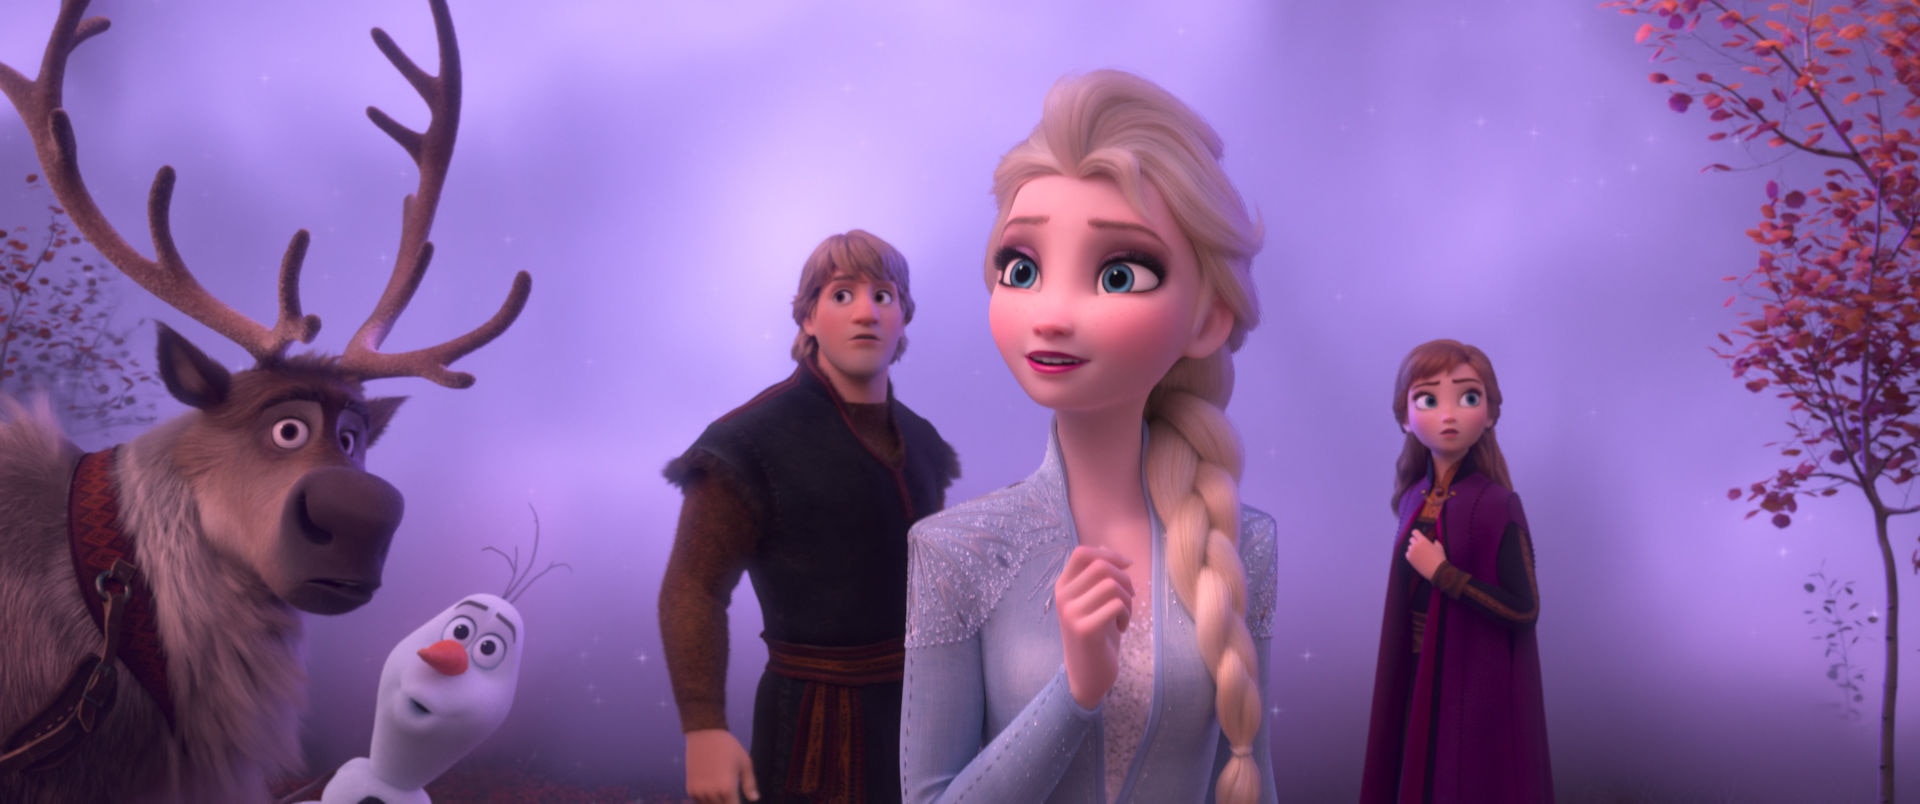 Let it go and watch the new trailer for Disney's Frozen 2! | SYFY